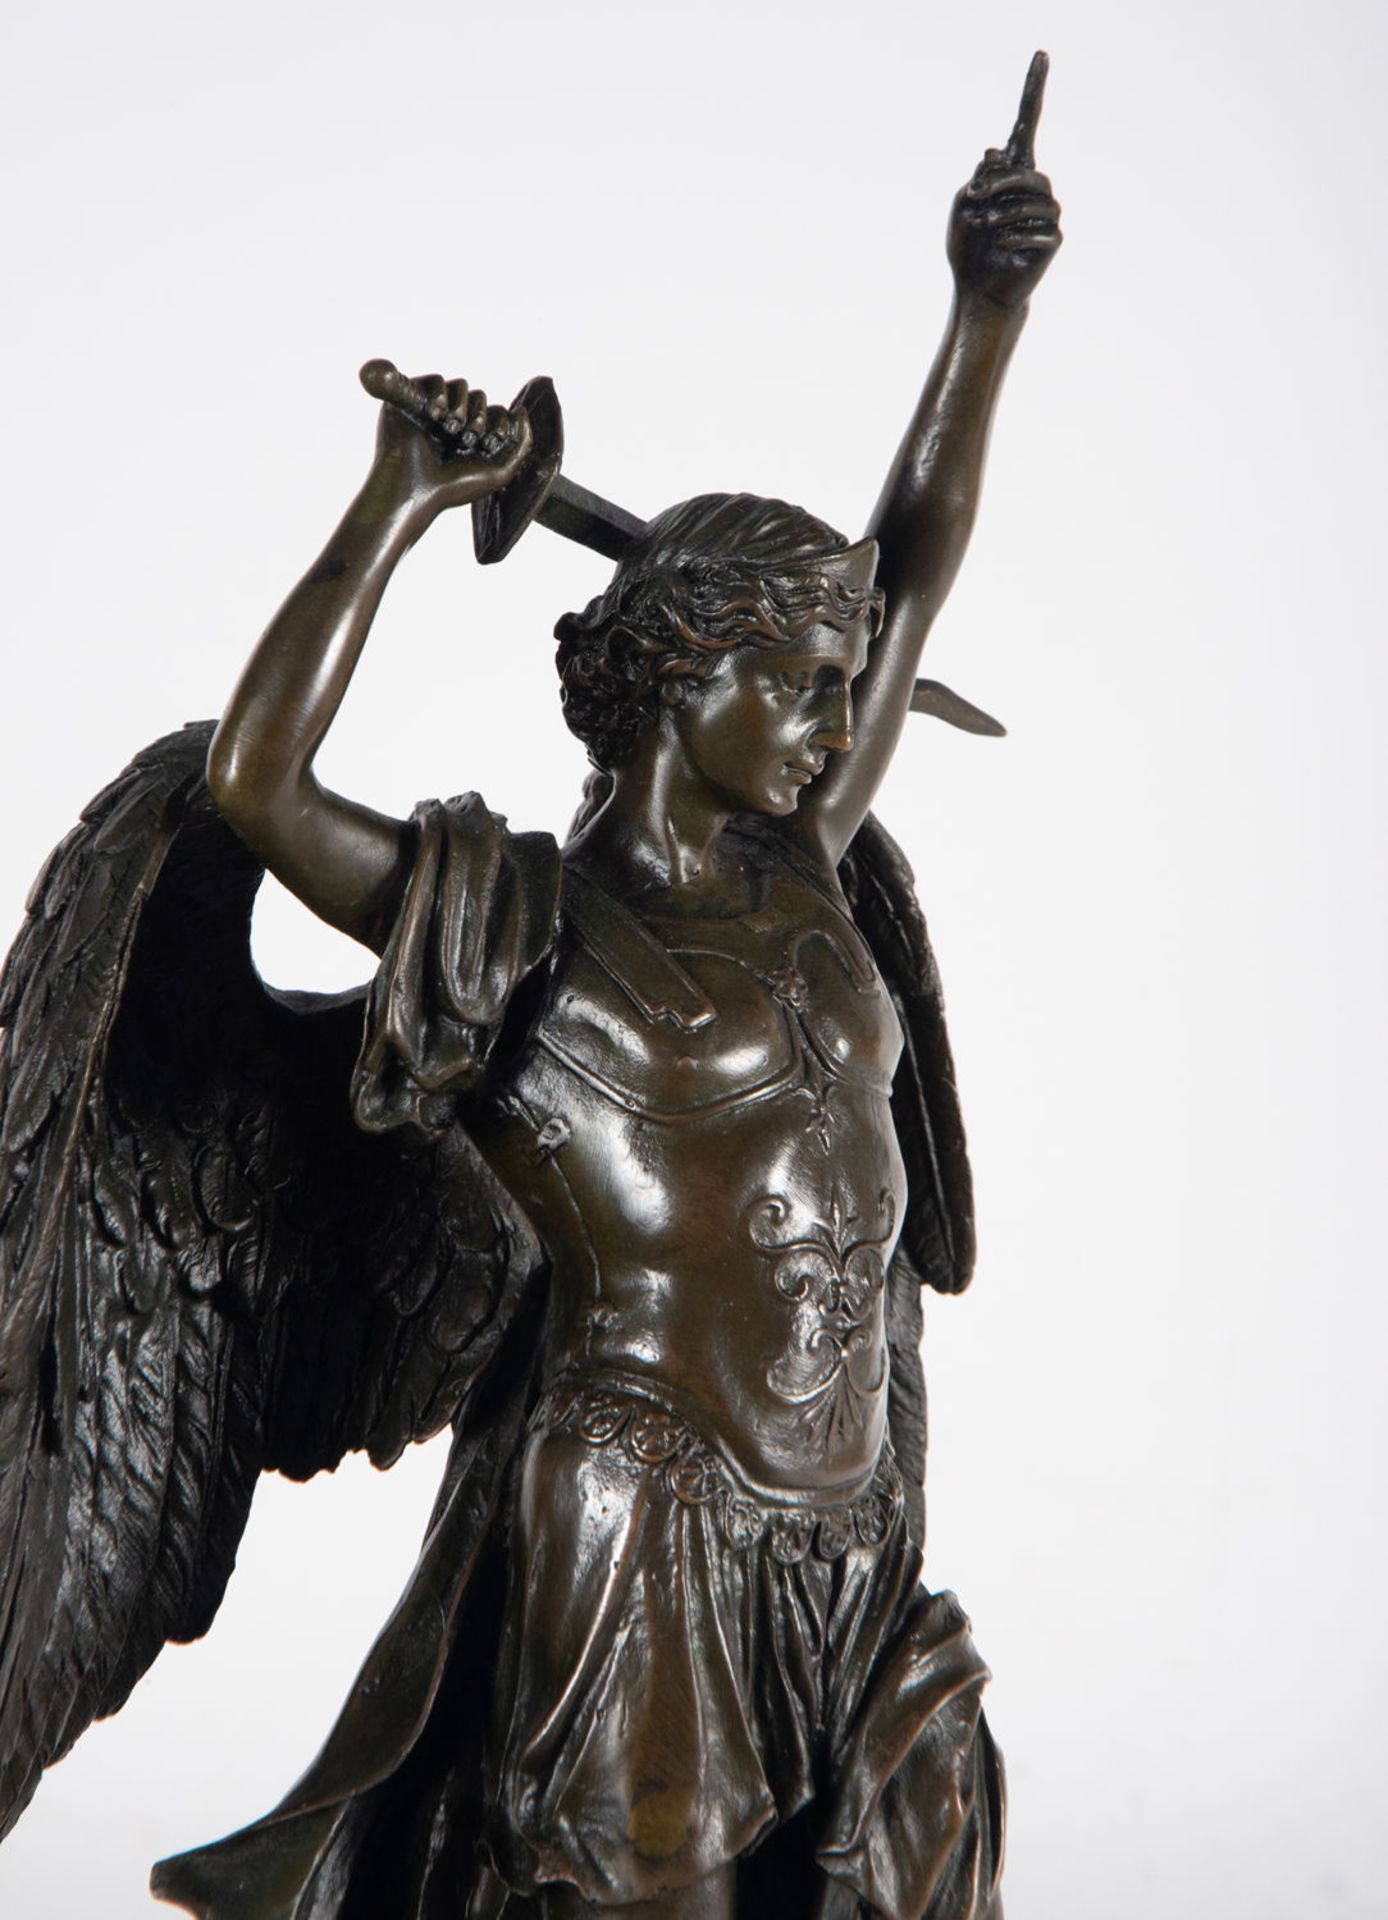 Saint Michael the Archangel Defeating the Evil One in patinated bronze, XIX - XX Centuries - Image 4 of 6